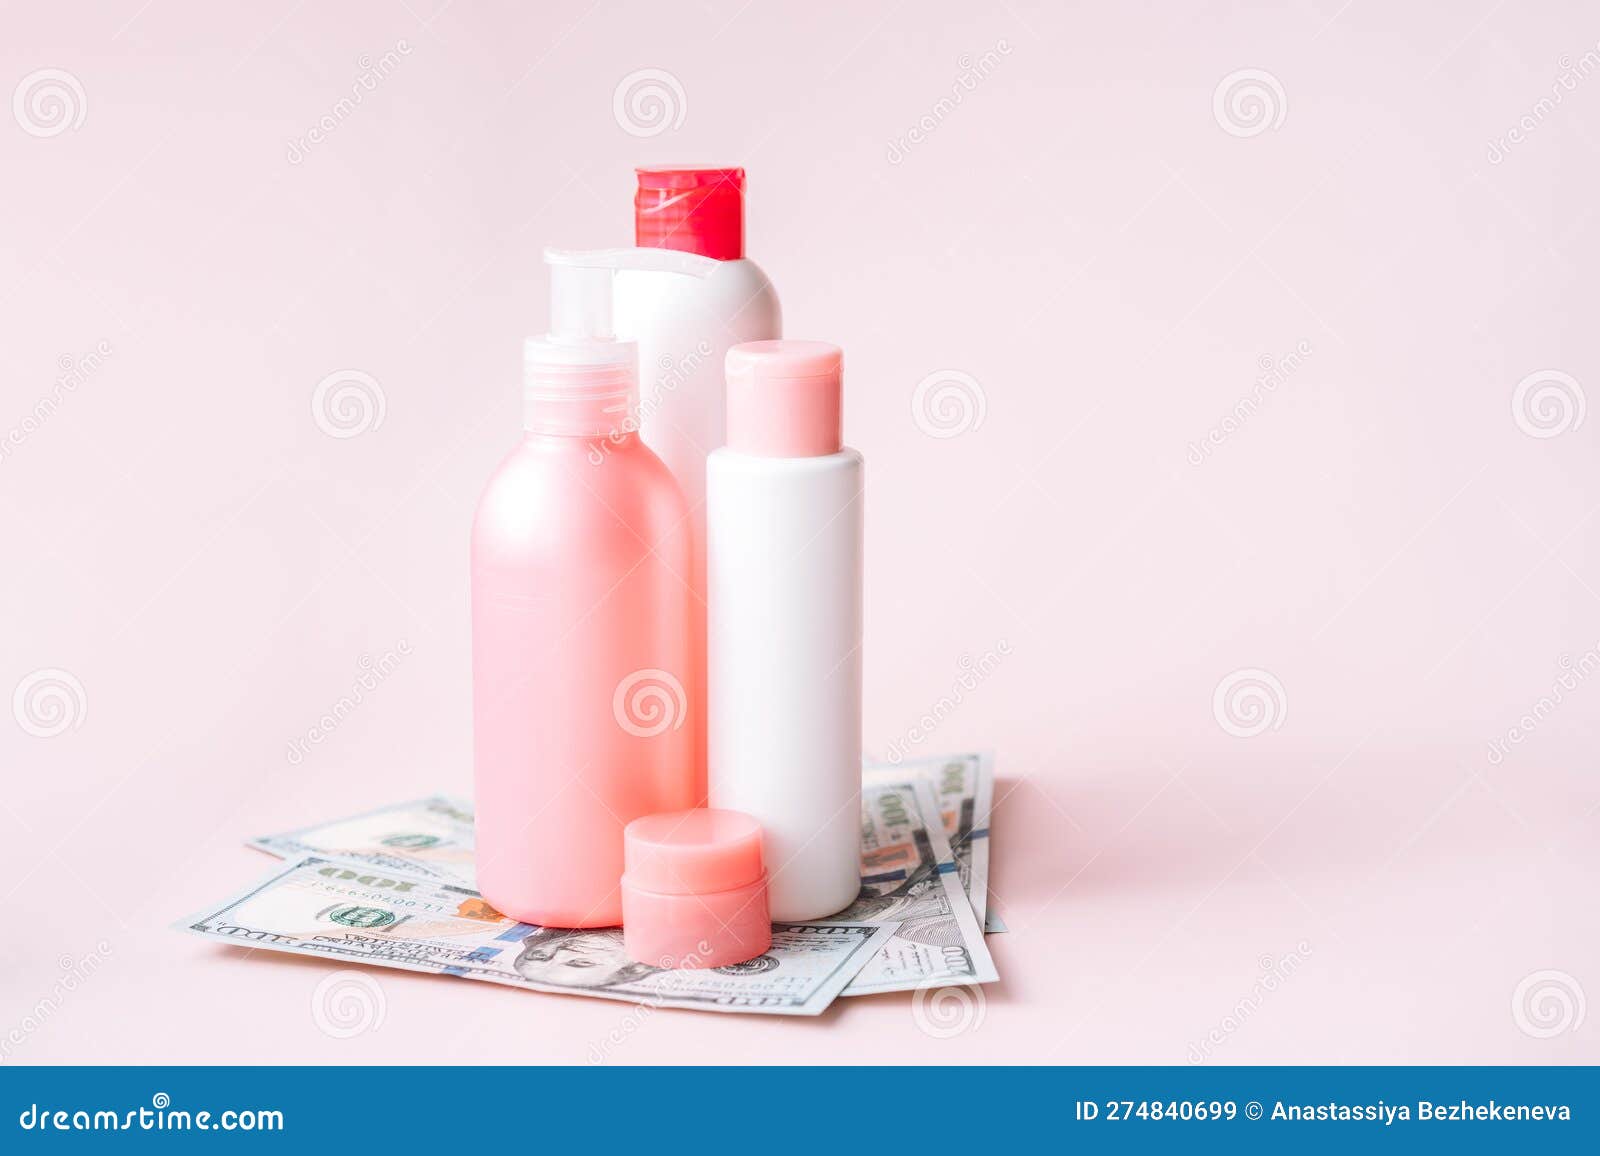 tubes with hygiene products on dollar bills against pink background